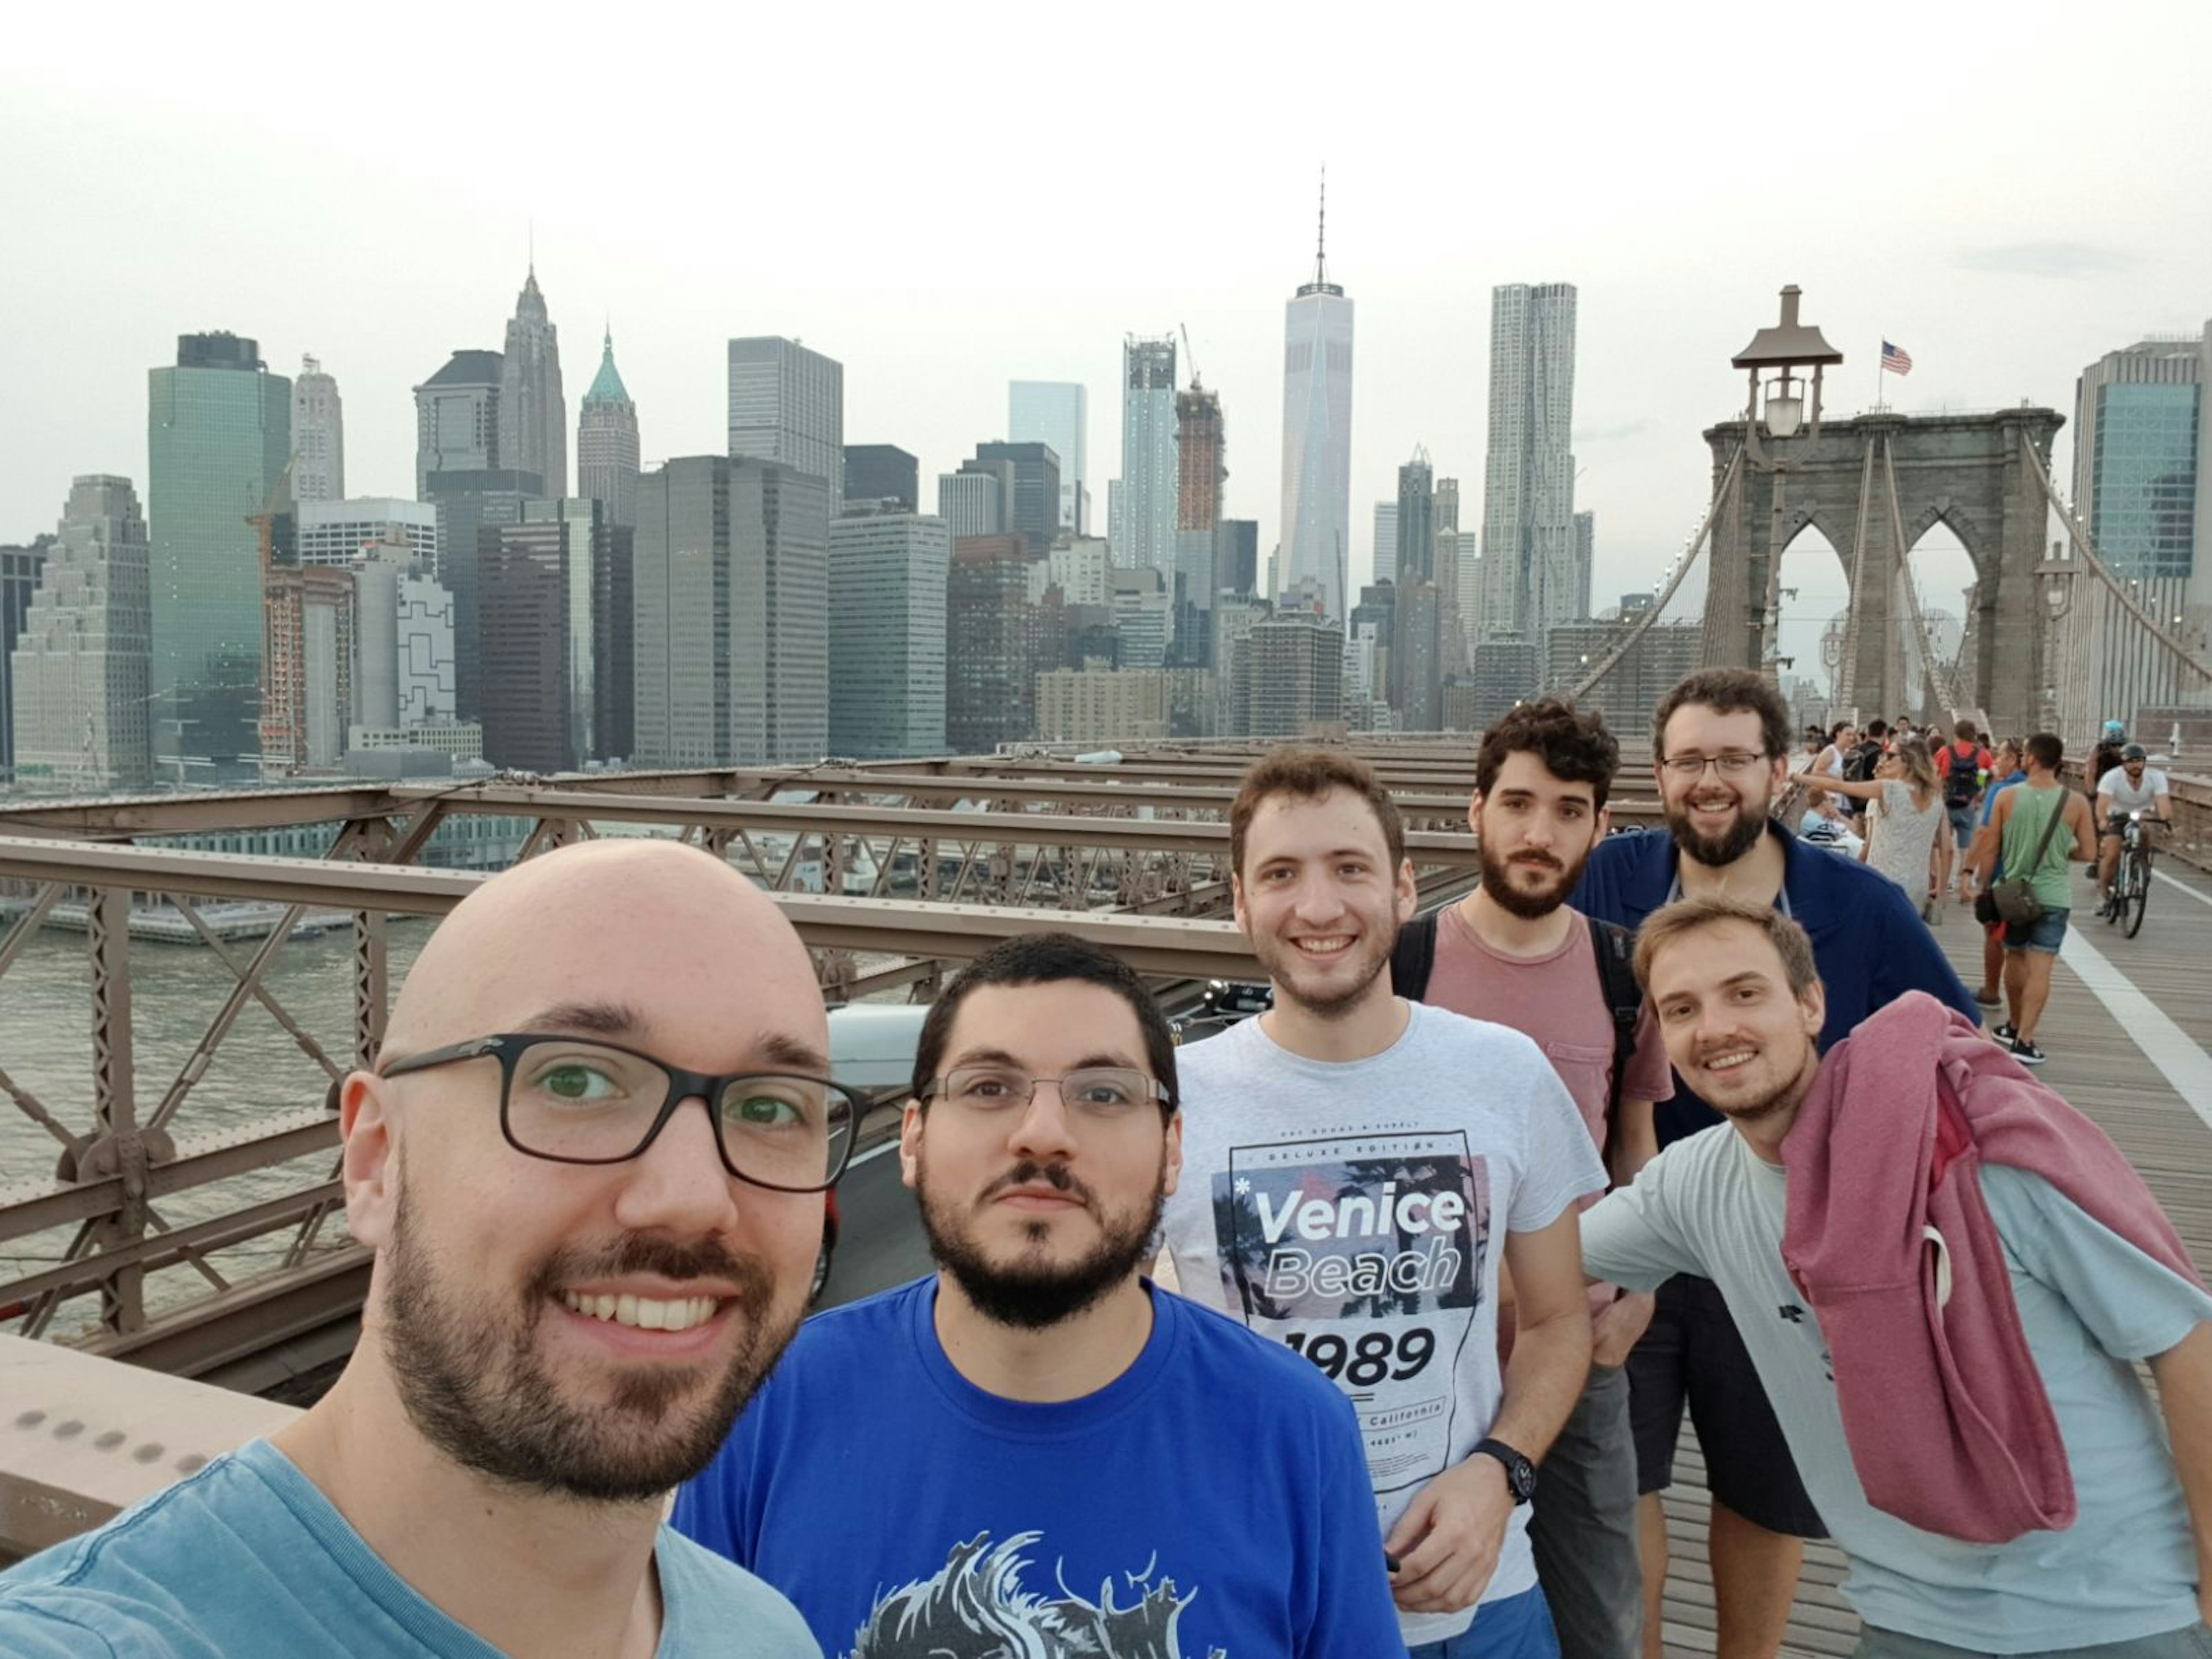 /assets/blog/2017-09-22-tryolabs-working-trip-nyc-in-pictures/2017-09-22-tryolabs-working-trip-nyc-in-pictures-7d6597e59f.jpeg